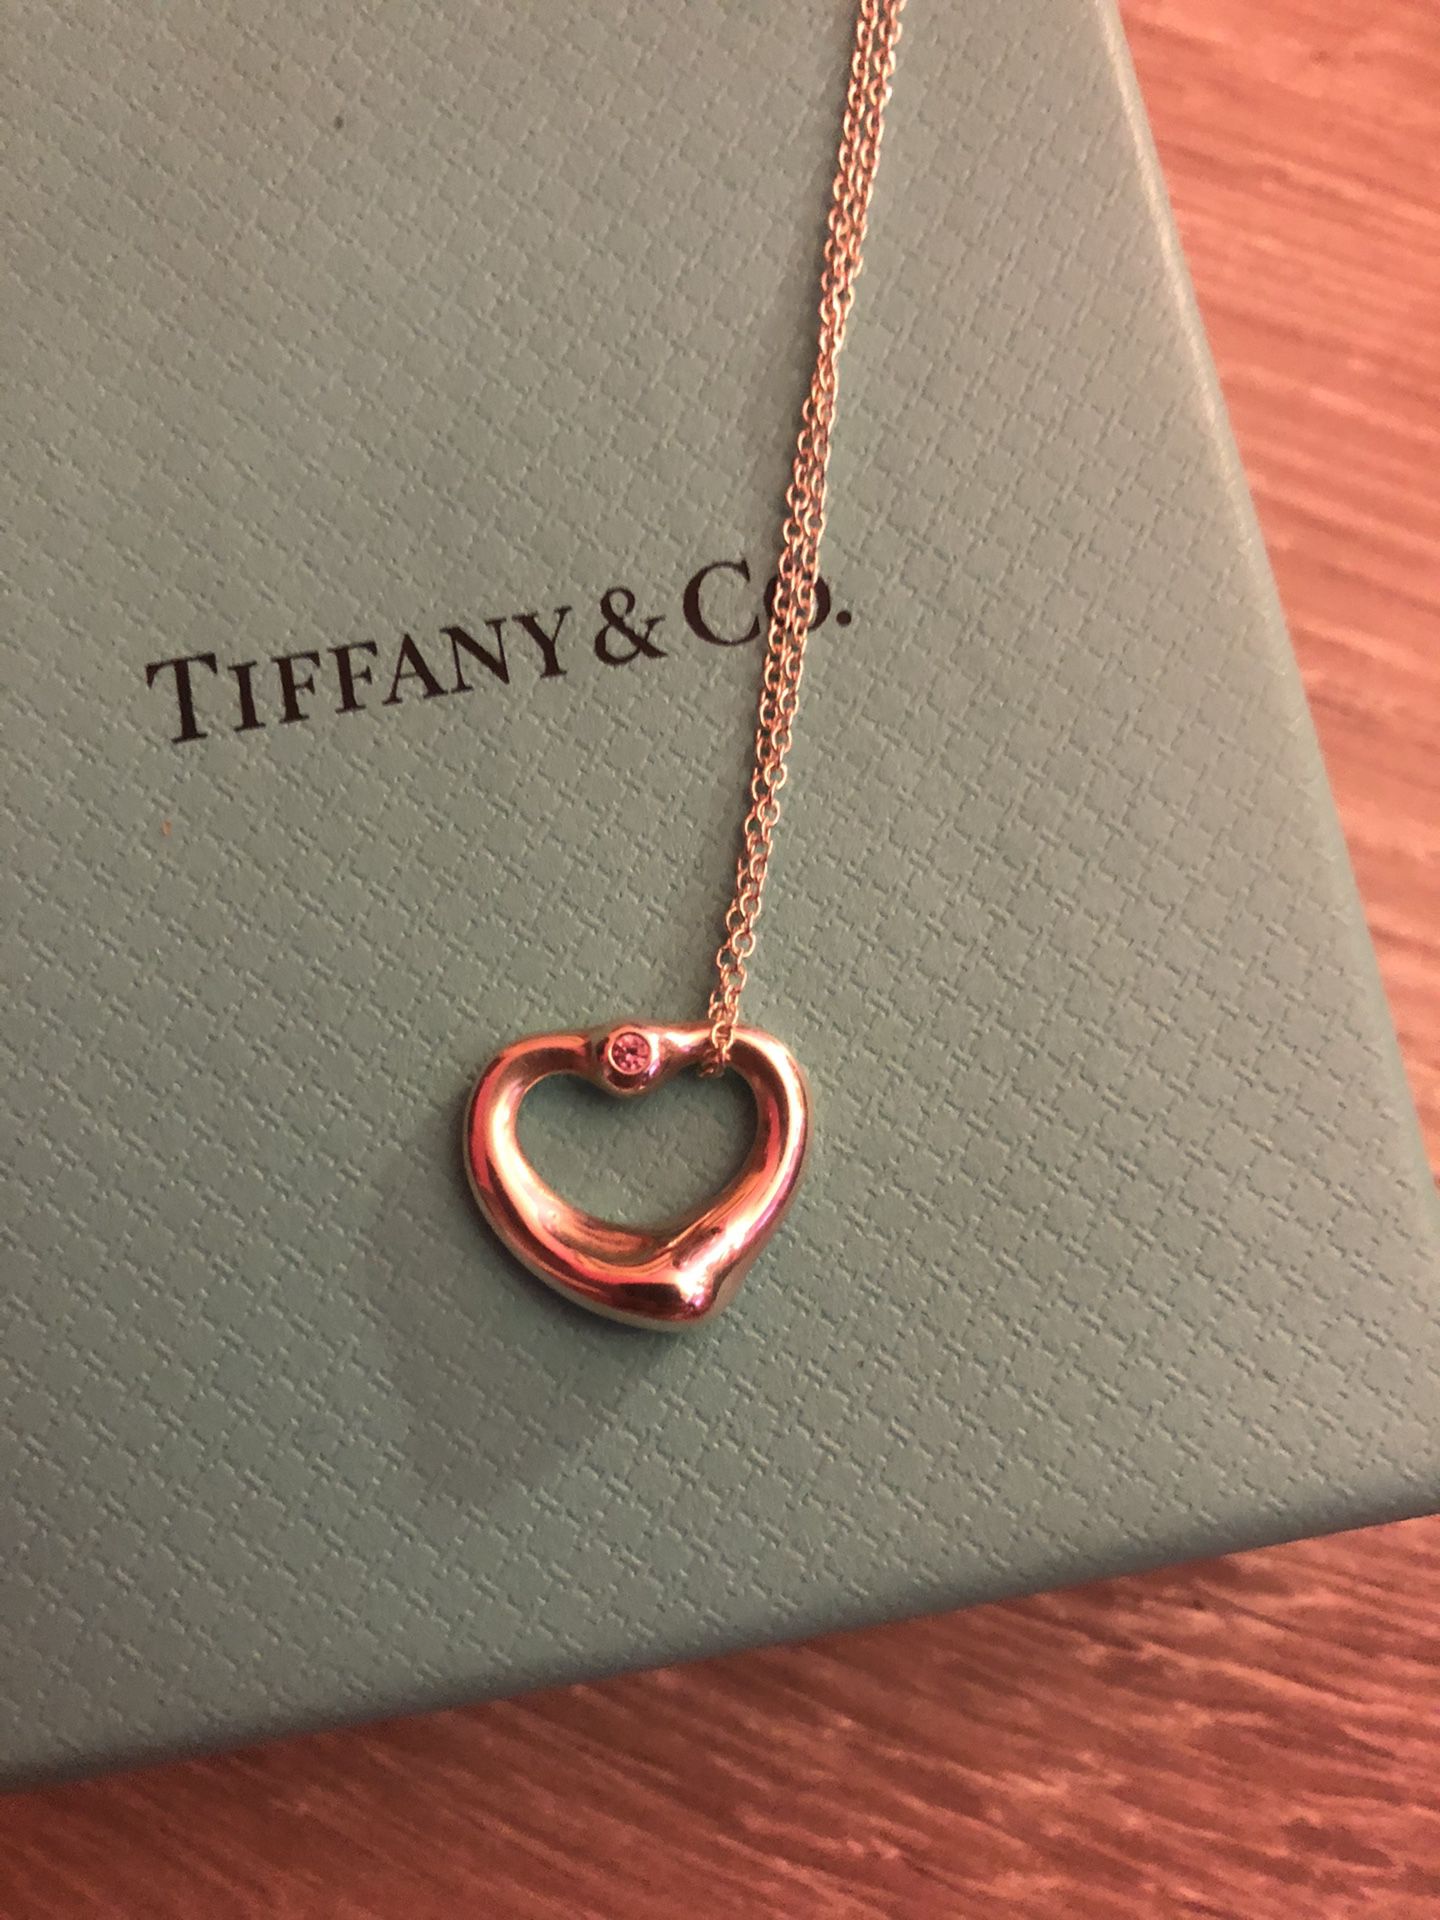 Tiffany and Co necklace